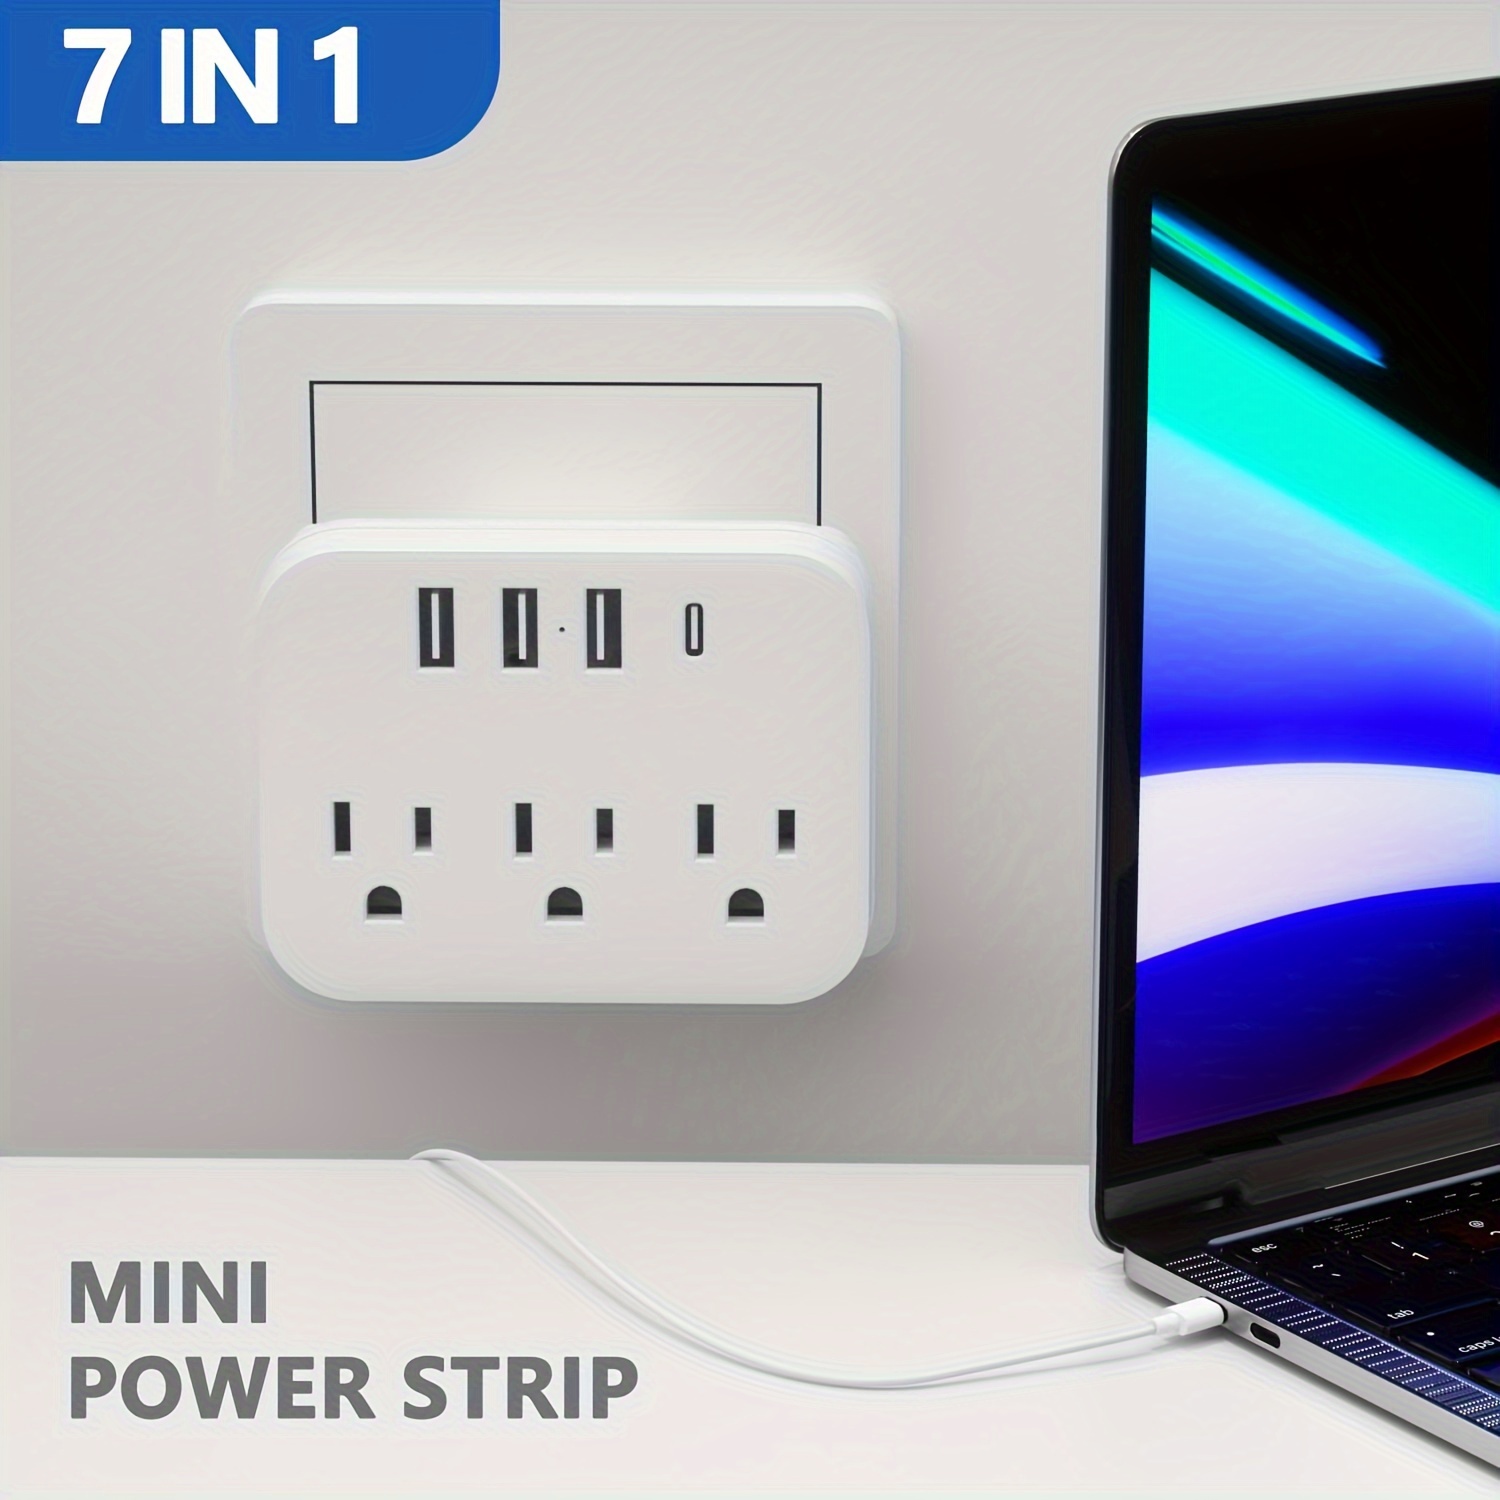 

1pc Multi-outlet Power Extension, Us Power Travel Adapter With 3 Usb Ports, 3 Ac Ports And 1 Type-c Port. Compact And Portable Design For Business And Travel. In White And Black.